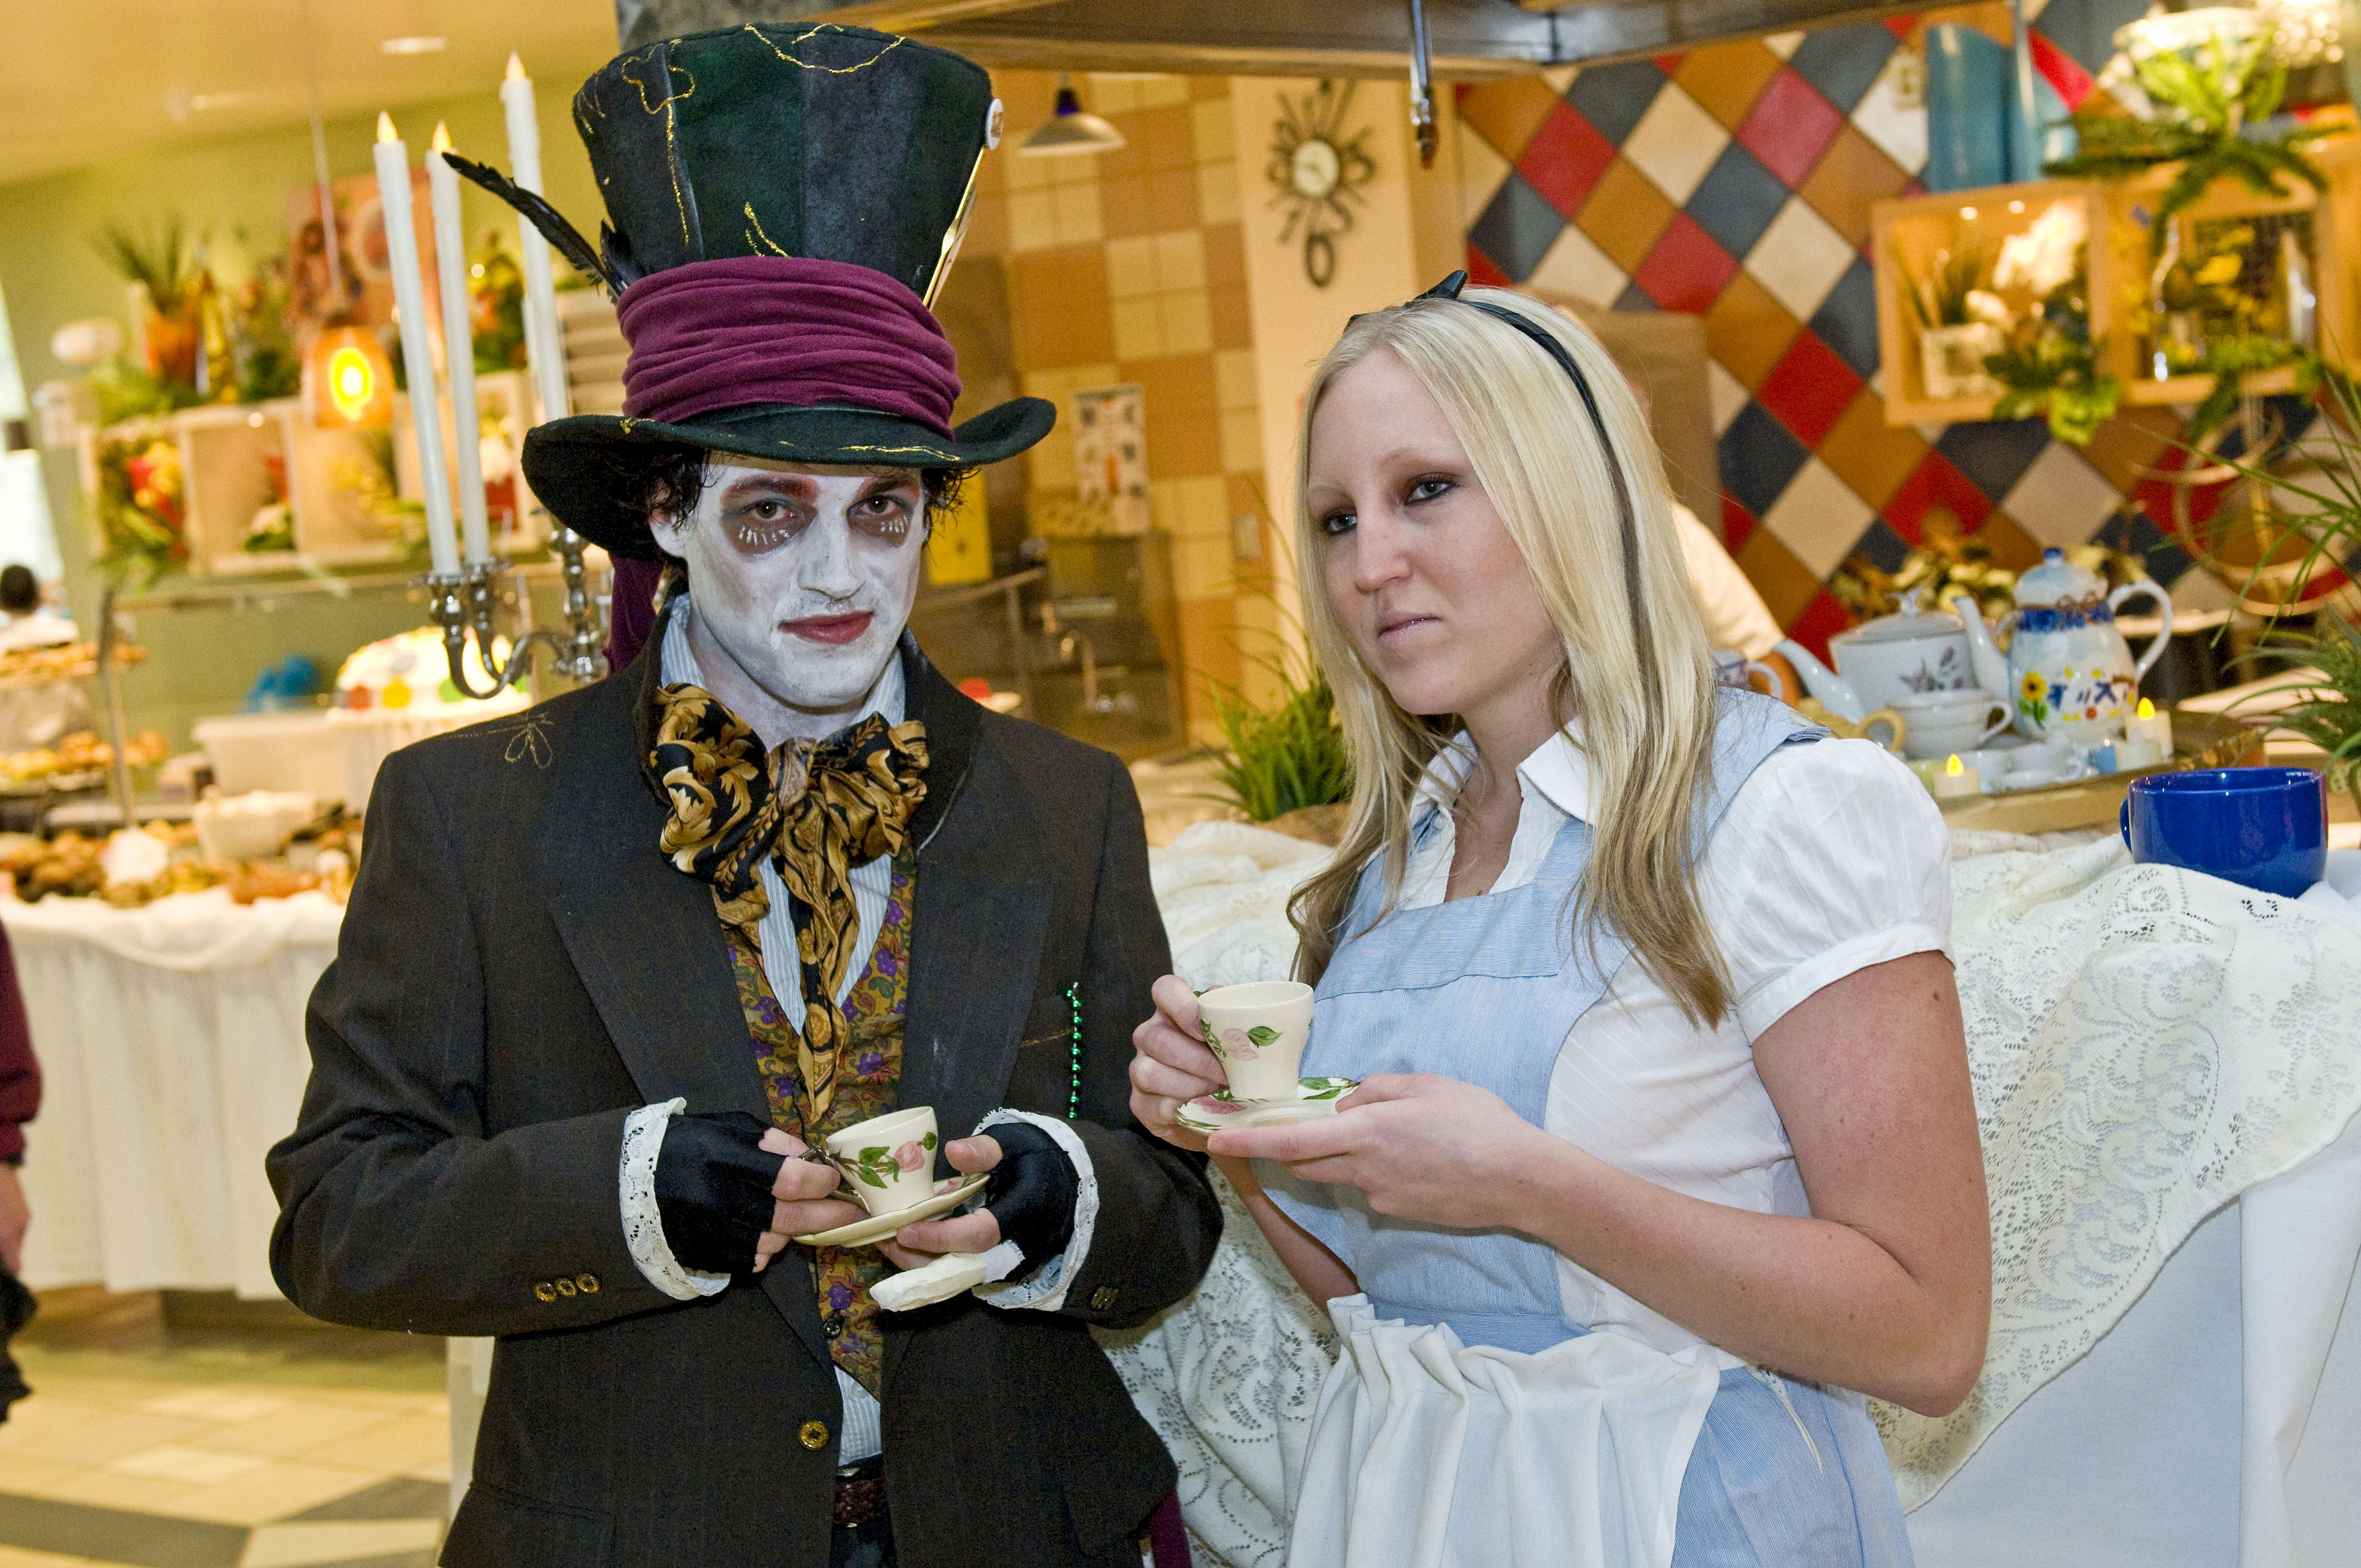 Dining Services employees dressed as Mad Hatter, left, and Alice characters.